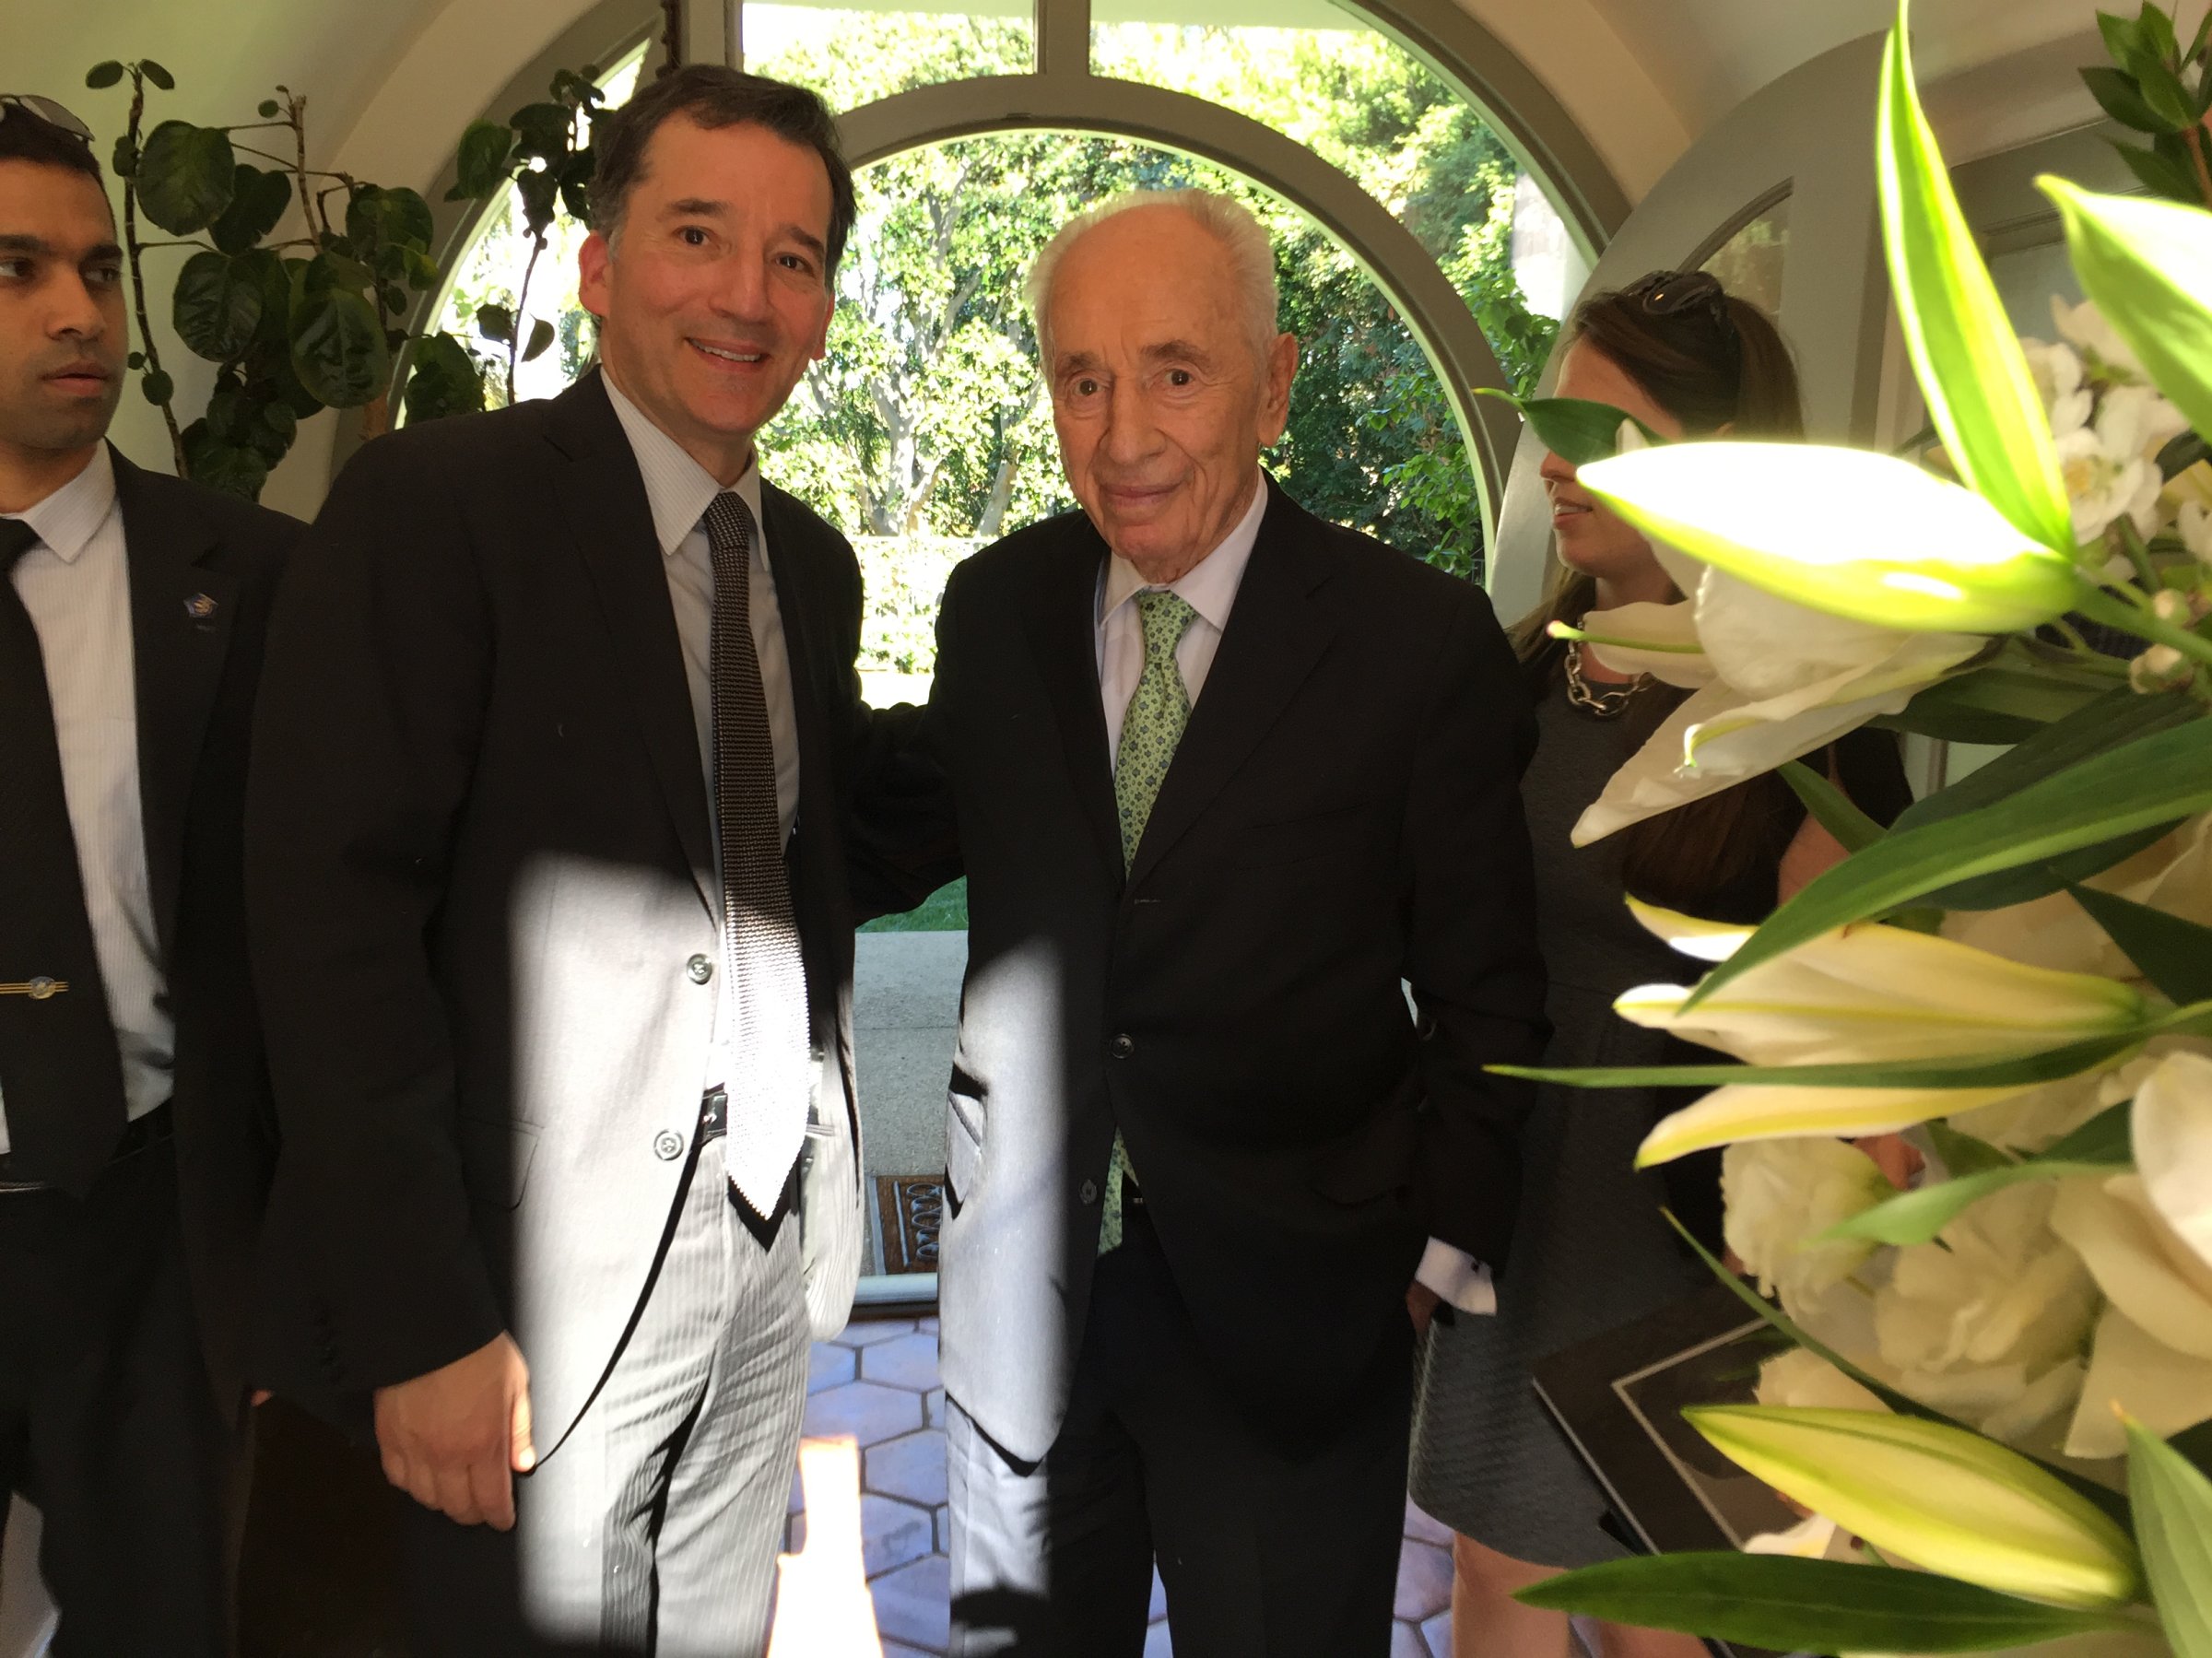 Rabbi David Wolpe and Shimon Peres at the home of Julie and Marc Platt in Los Angeles in February 2015.